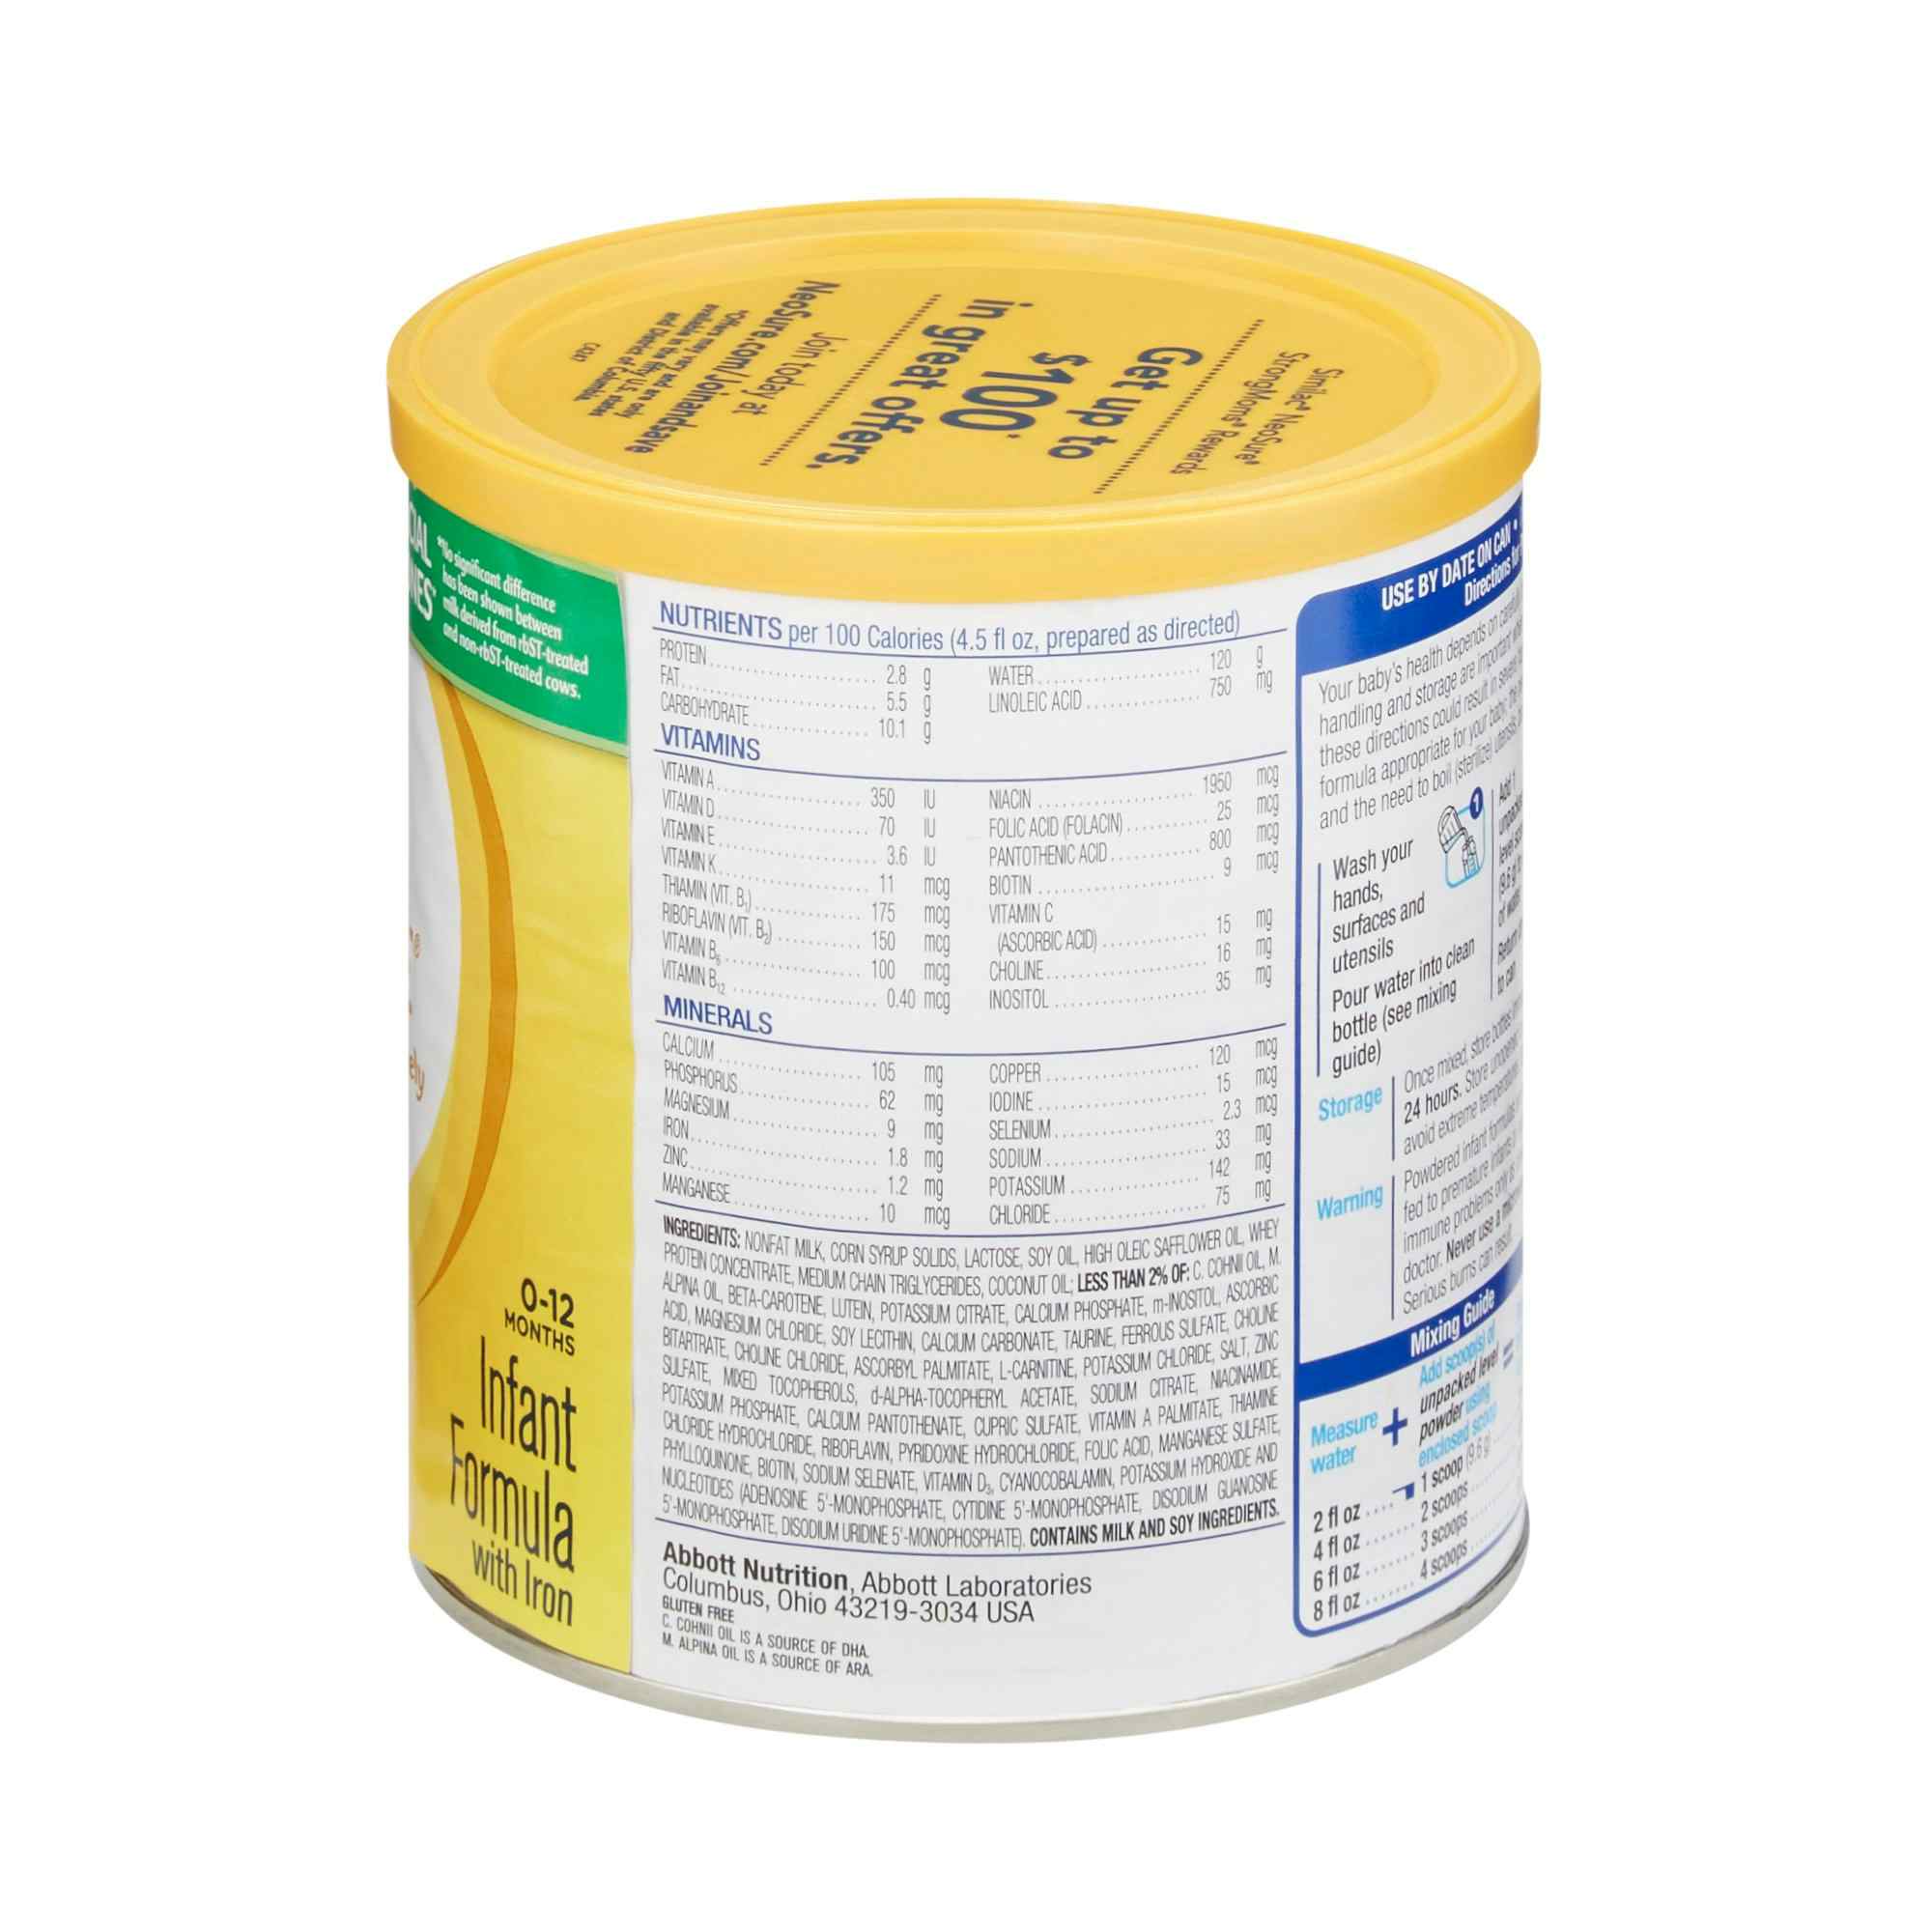 Similac NeoSure Infant Formula Powder, 13.1 oz., Can, 57430, Case of 6 Cans